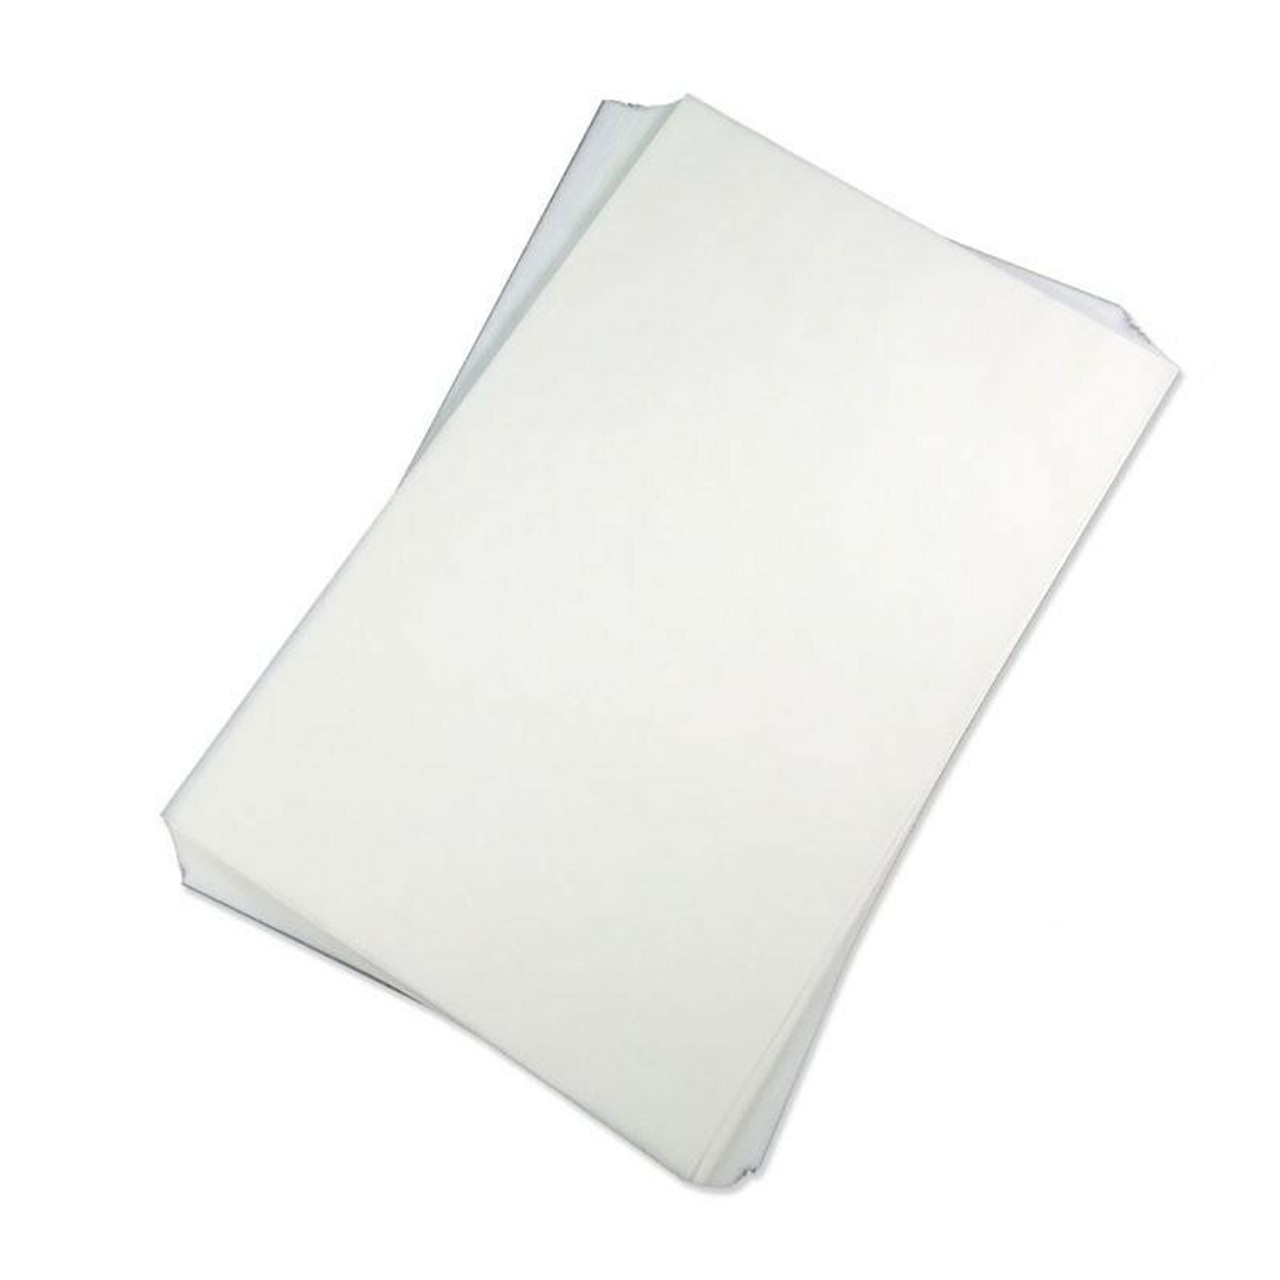 A4 Size Semi Clear Printable Vinyl for Crafting 30 Paper Sheets per Pack  Compatible with Ink-jet Printer